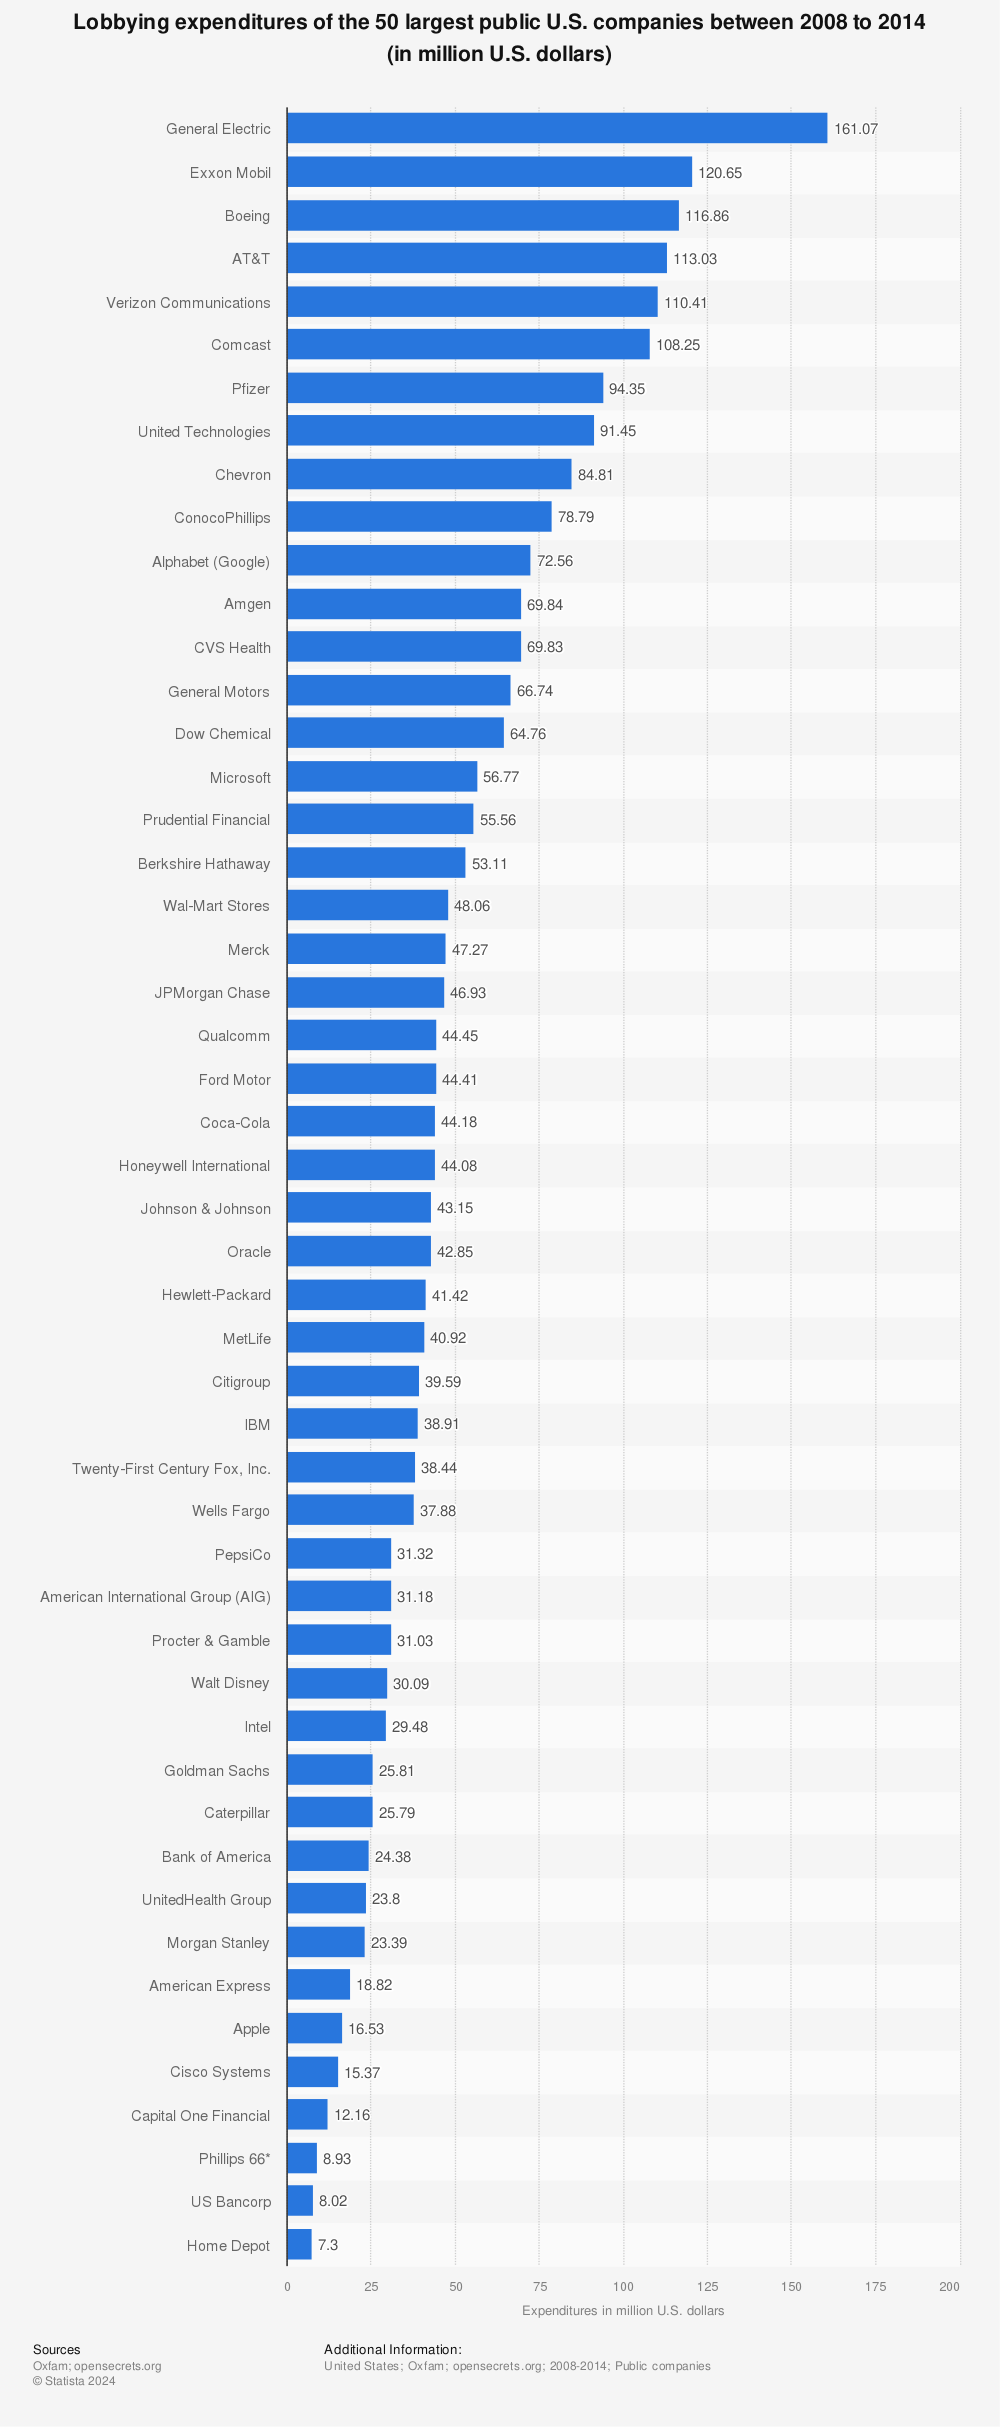 Statistic: Lobbying expenditures of the 50 largest public U.S. companies between 2008 to 2014 (in million U.S. dollars) | Statista